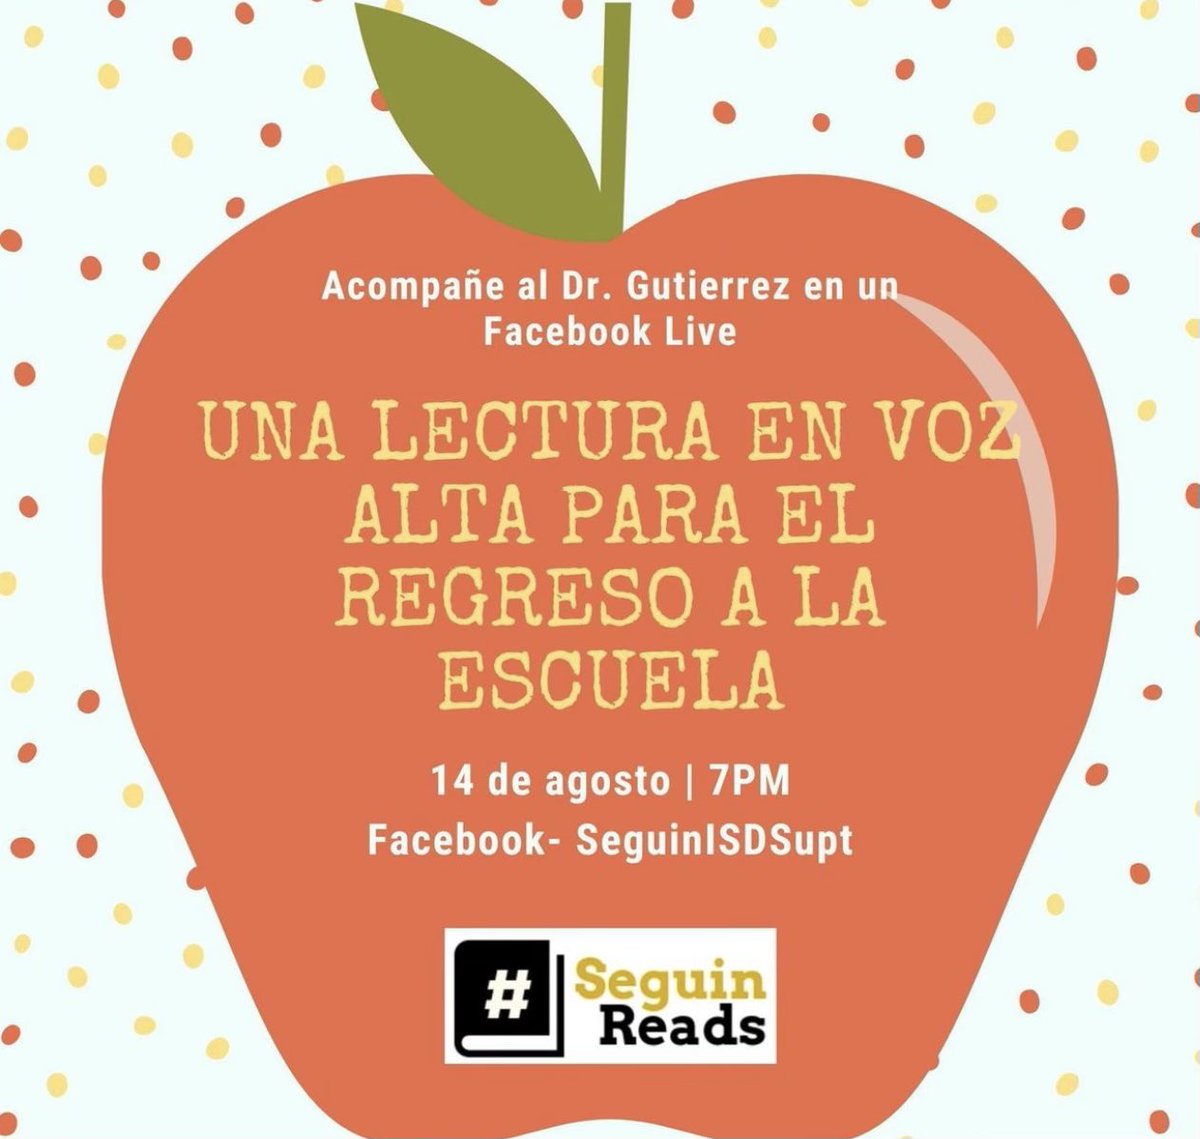 Start the school year off right! #WeAreSeguin #SeguinReads @SISD_Teach will be listening in for sure! #k12Literacy